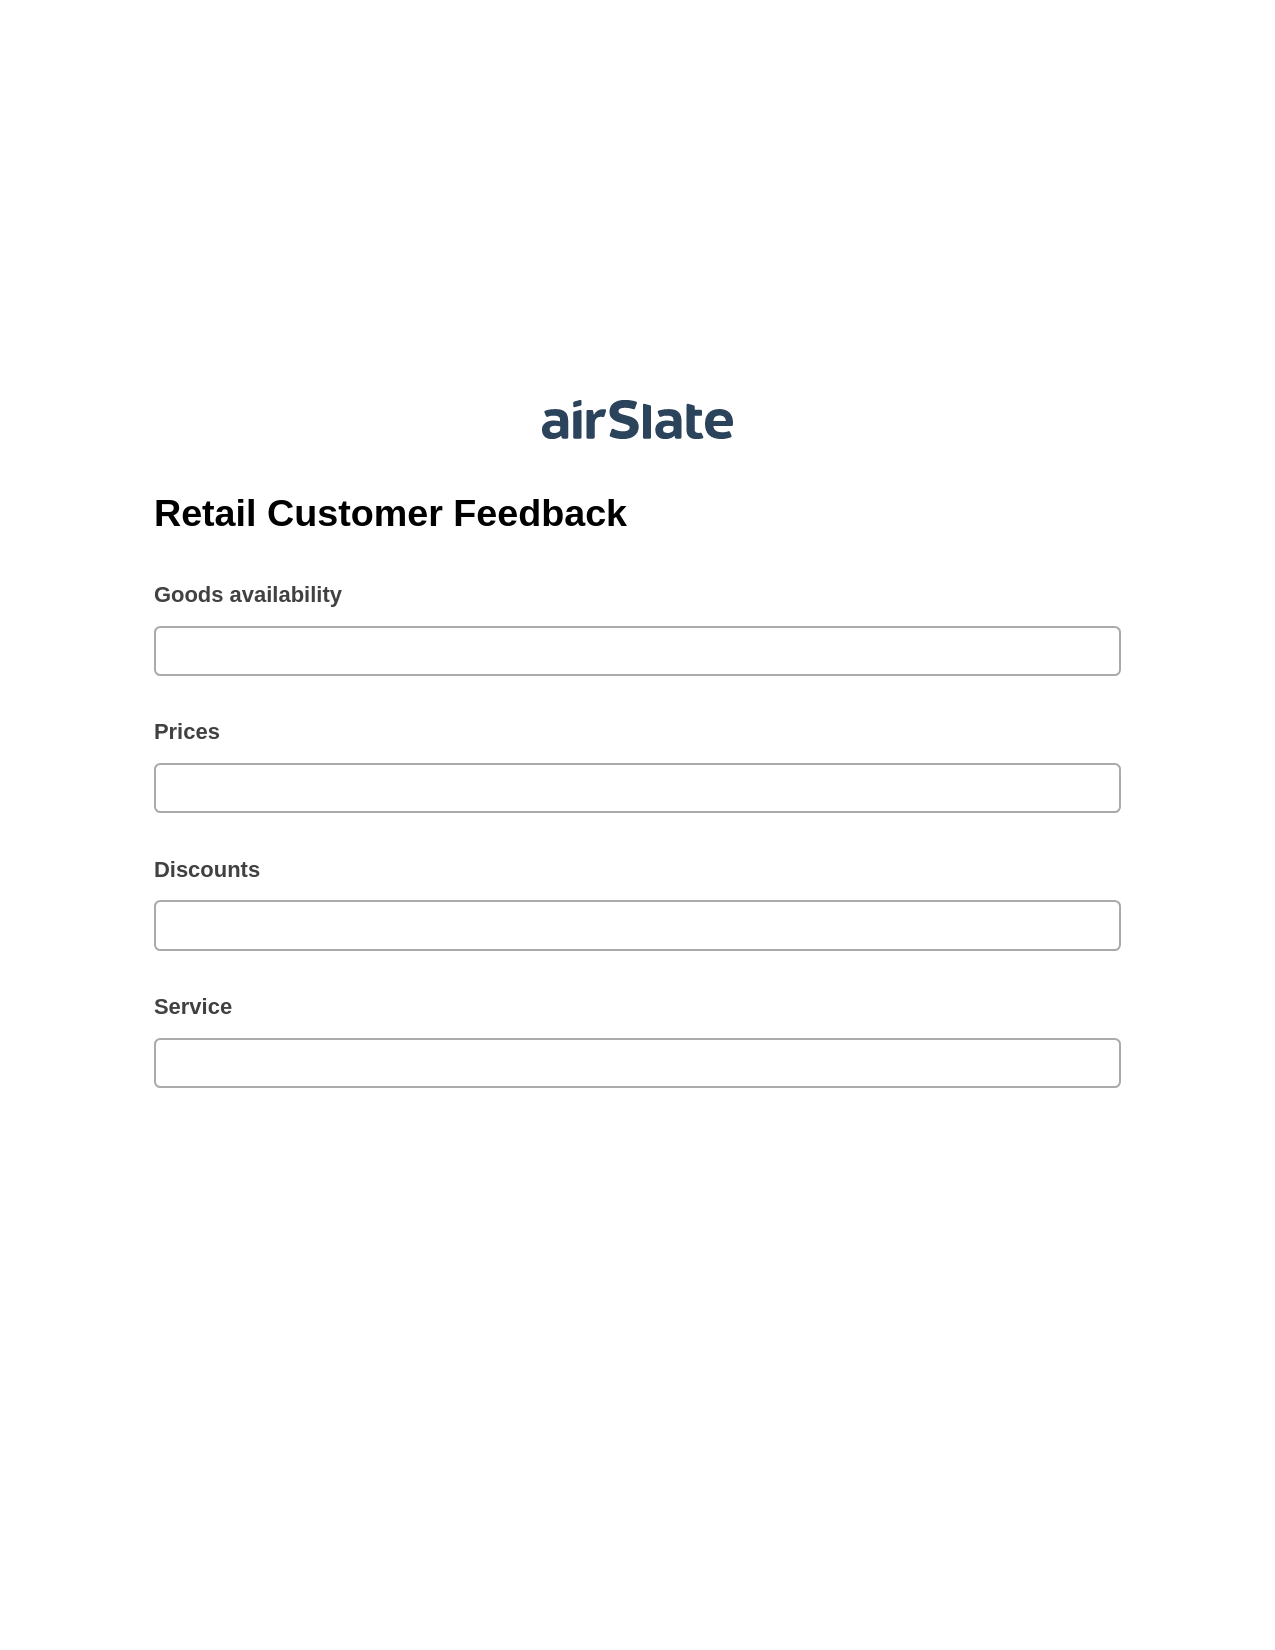 Multirole Retail Customer Feedback Pre-fill Slate from MS Dynamics 365 Records Bot, Send a Slate to Salesforce Contact Bot, Export to Formstack Documents Bot